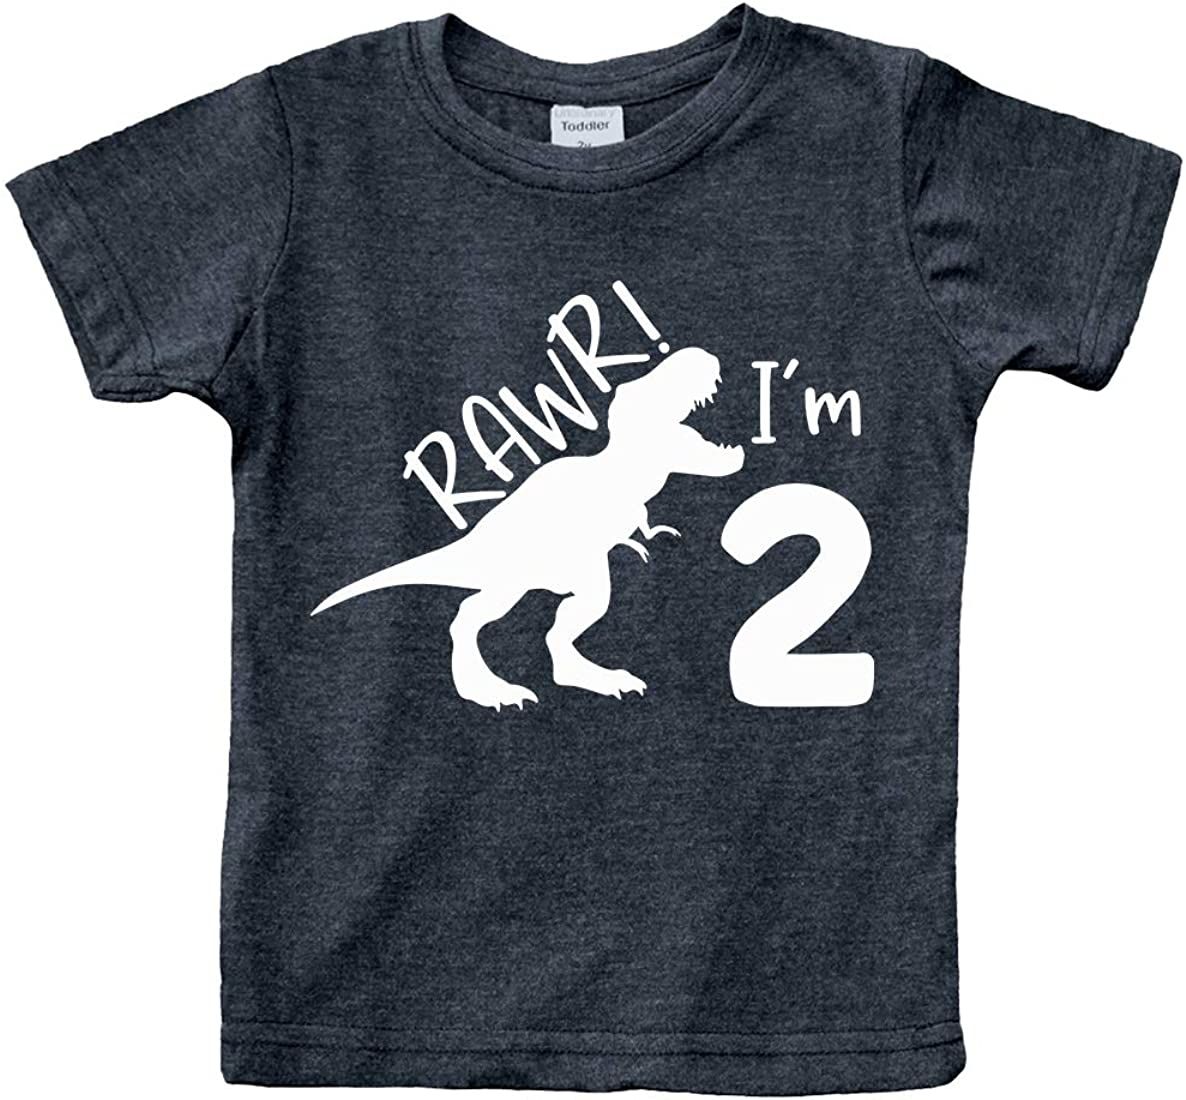 2nd Birthday Shirt boy Dinosaur rawr im 2 Toddler Two Year Old Second Dino Outfit | Amazon (US)